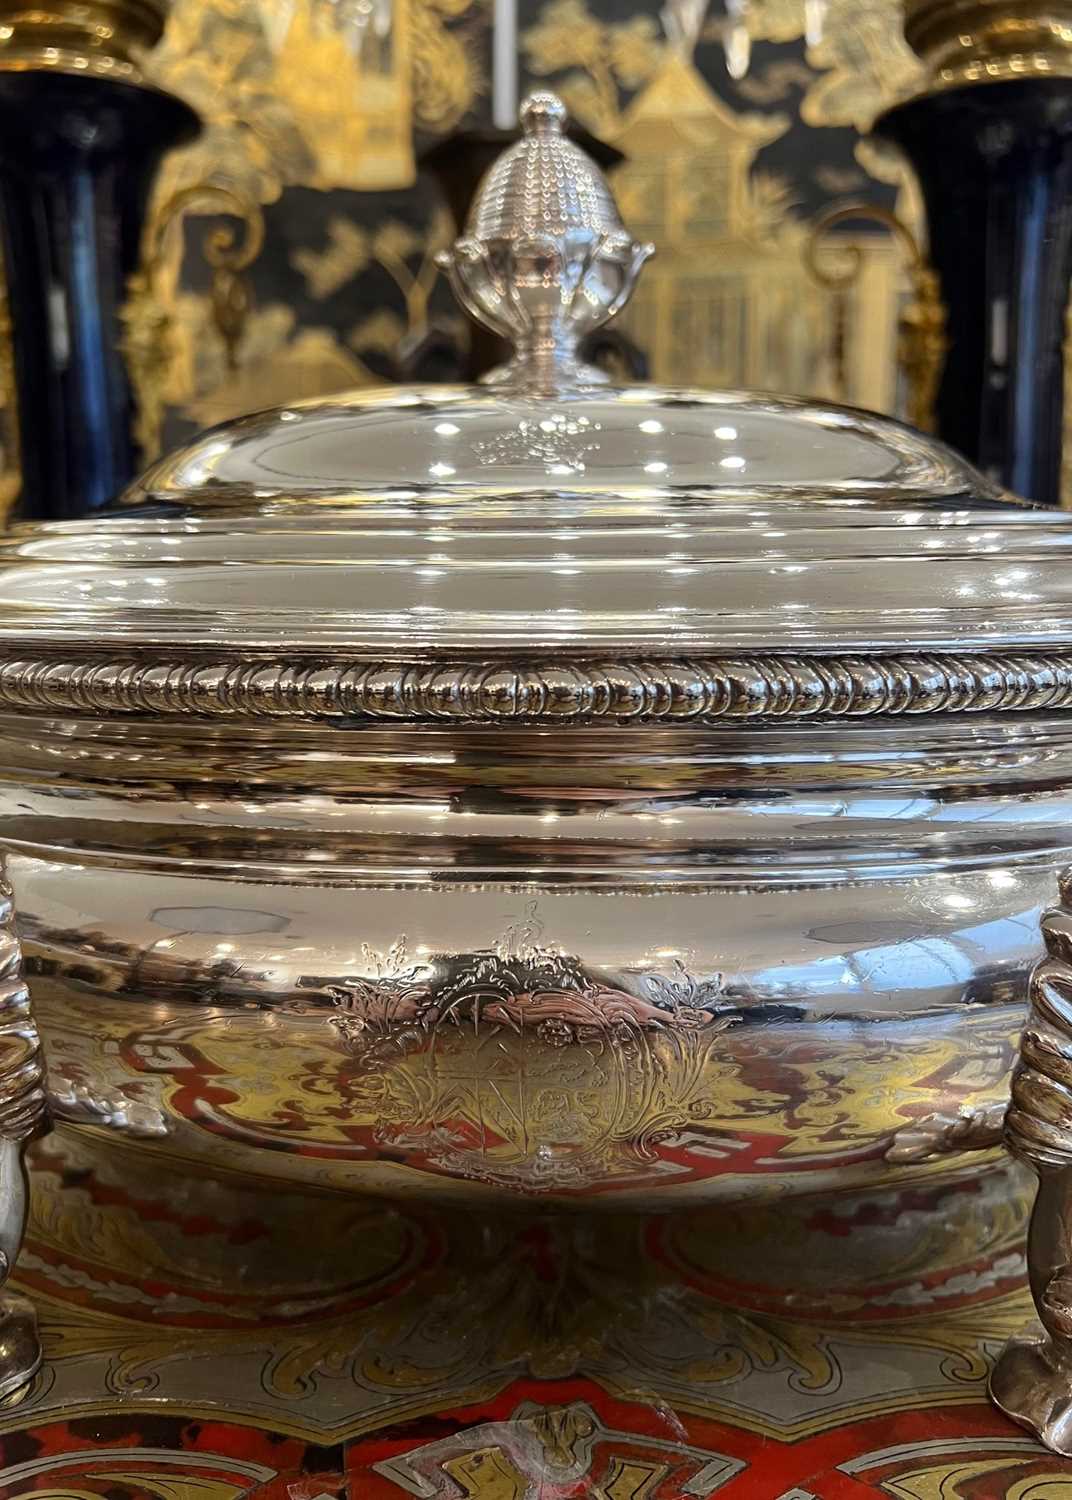 A FINE GEORGE II PERIOD STERLING SILVER SOUP TUREEN C. 1754 BY AYME VIDEAU, LONDON - Image 4 of 10